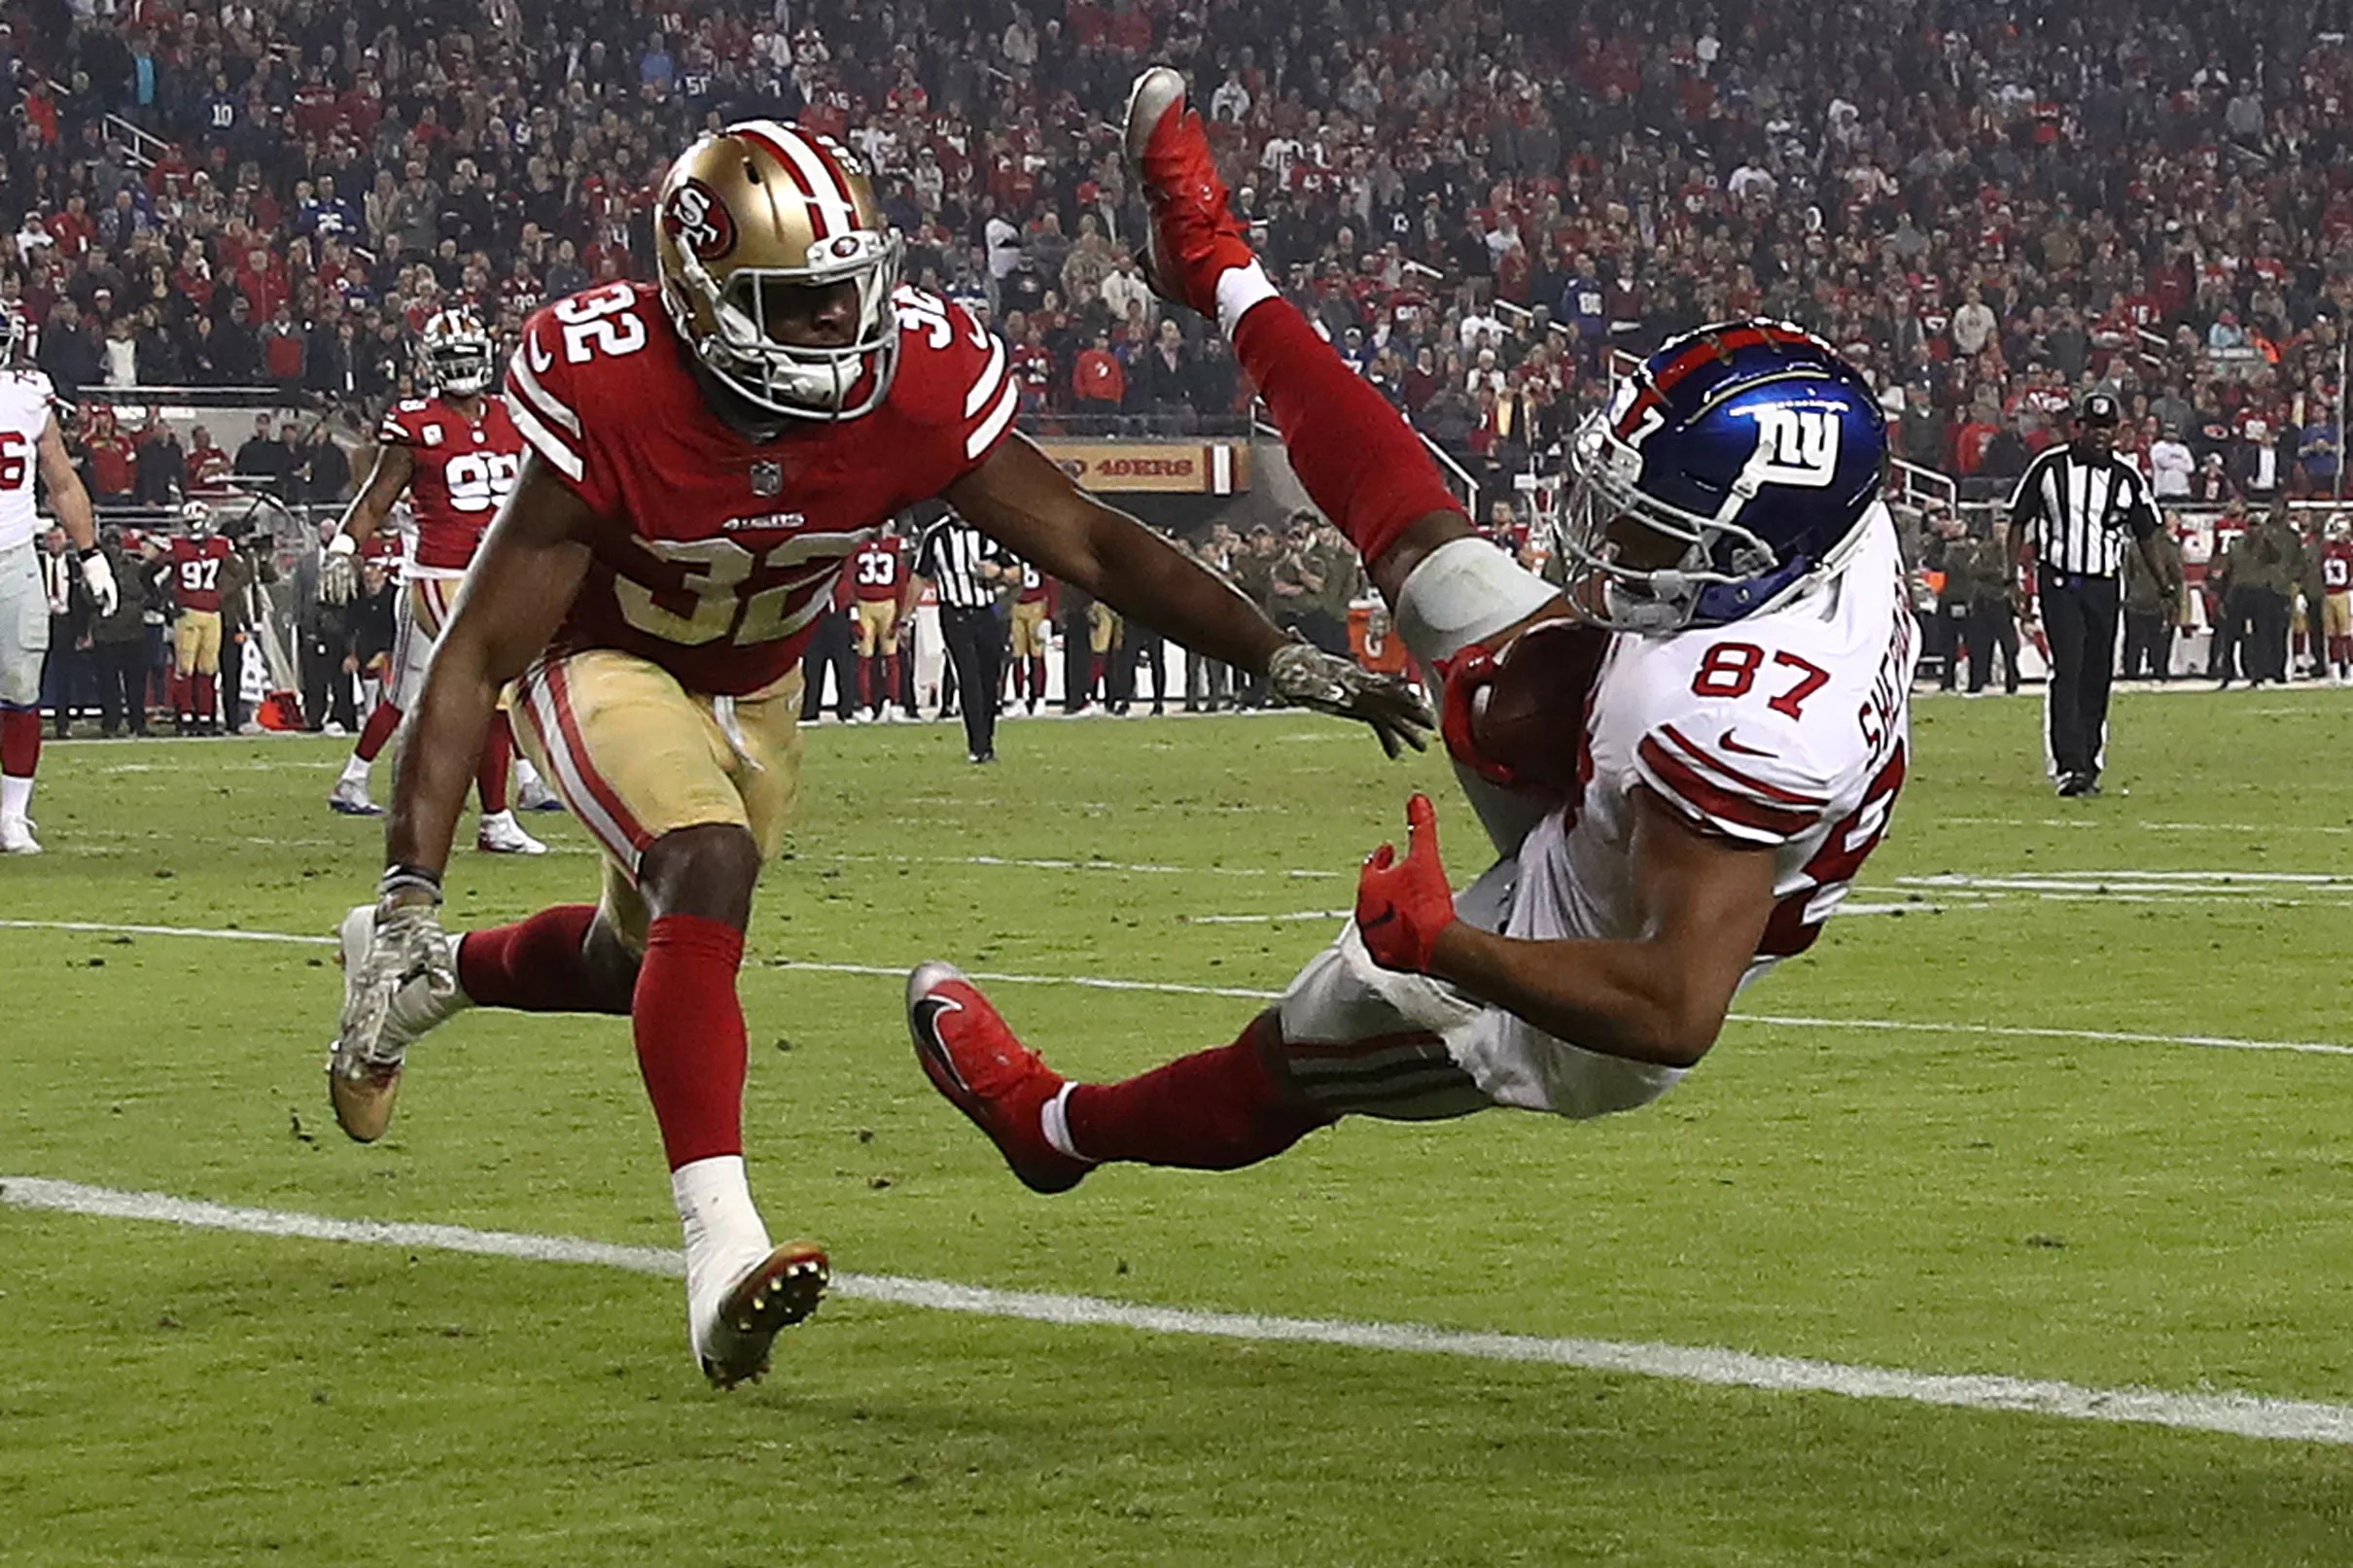 Plays that changed the game in a 27-23 Giants’ victory over the 49ers